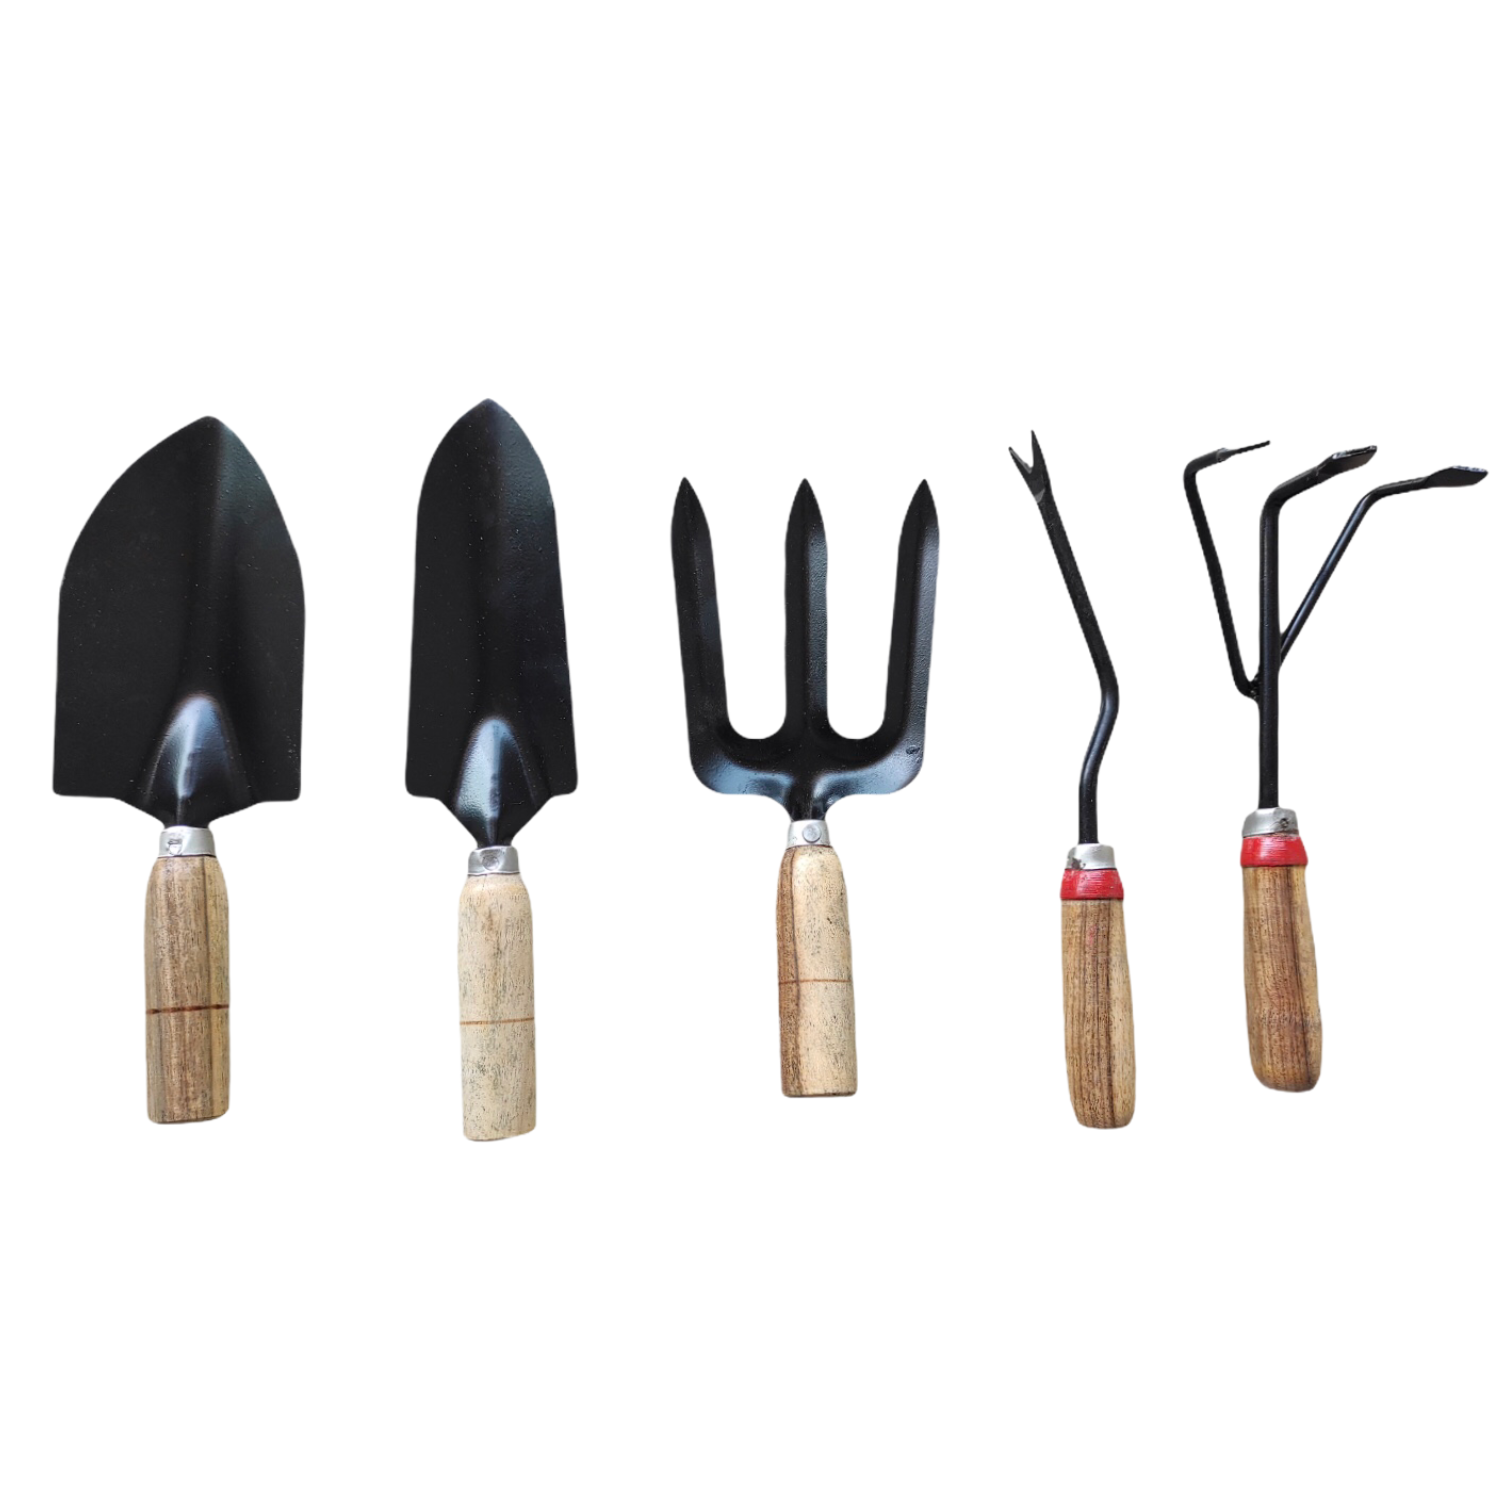 Gardening Toolkit with Wooden Handle - 5 tools